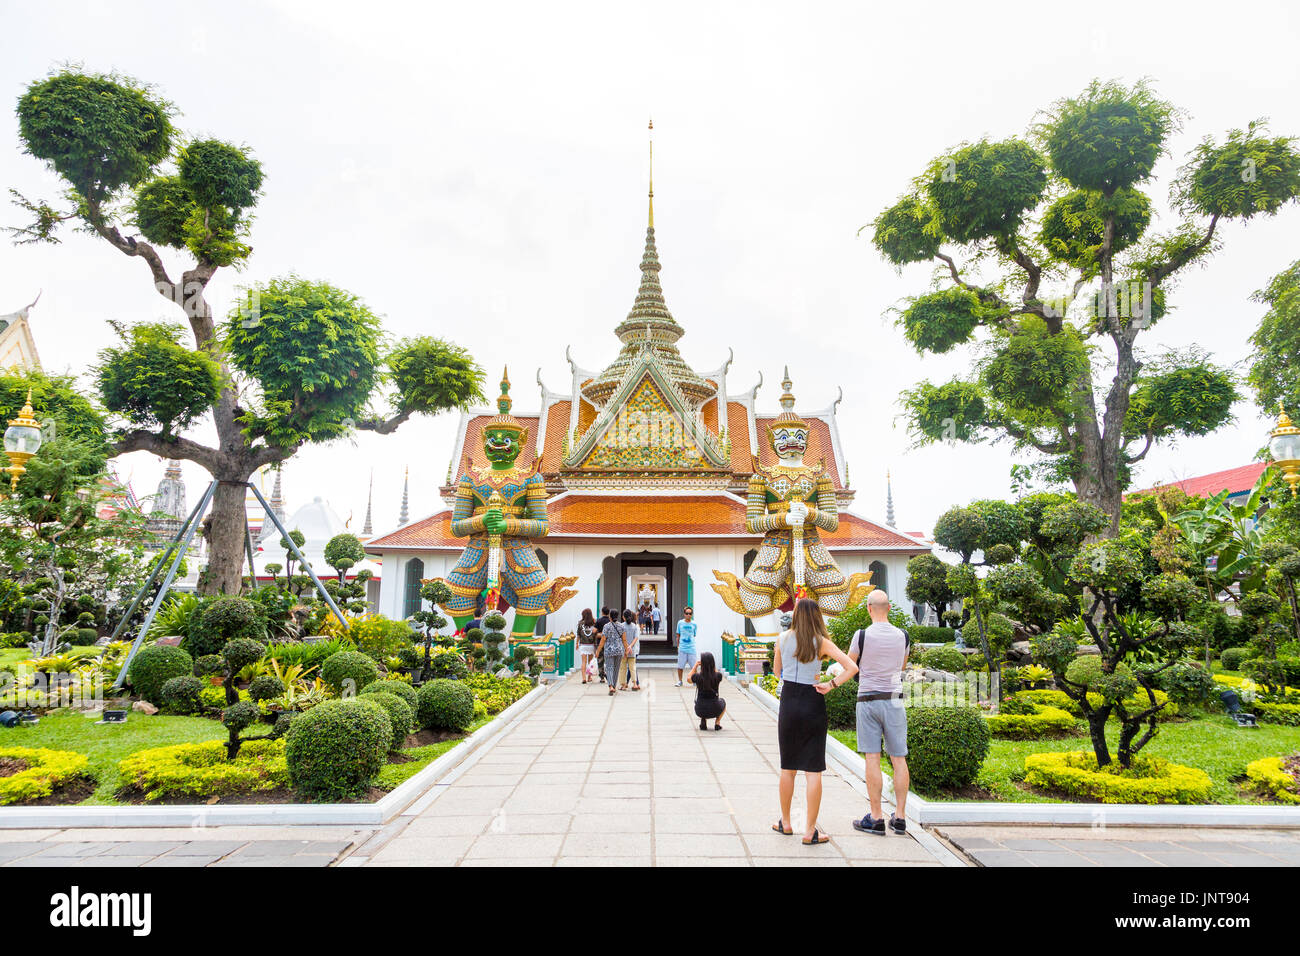 The entrance (Phra Ubosot) to monastic quarters complex with giant demon figures and topiary trees at Wat Arun (Temple of Dawn) in Bangkok, Thailand Stock Photo